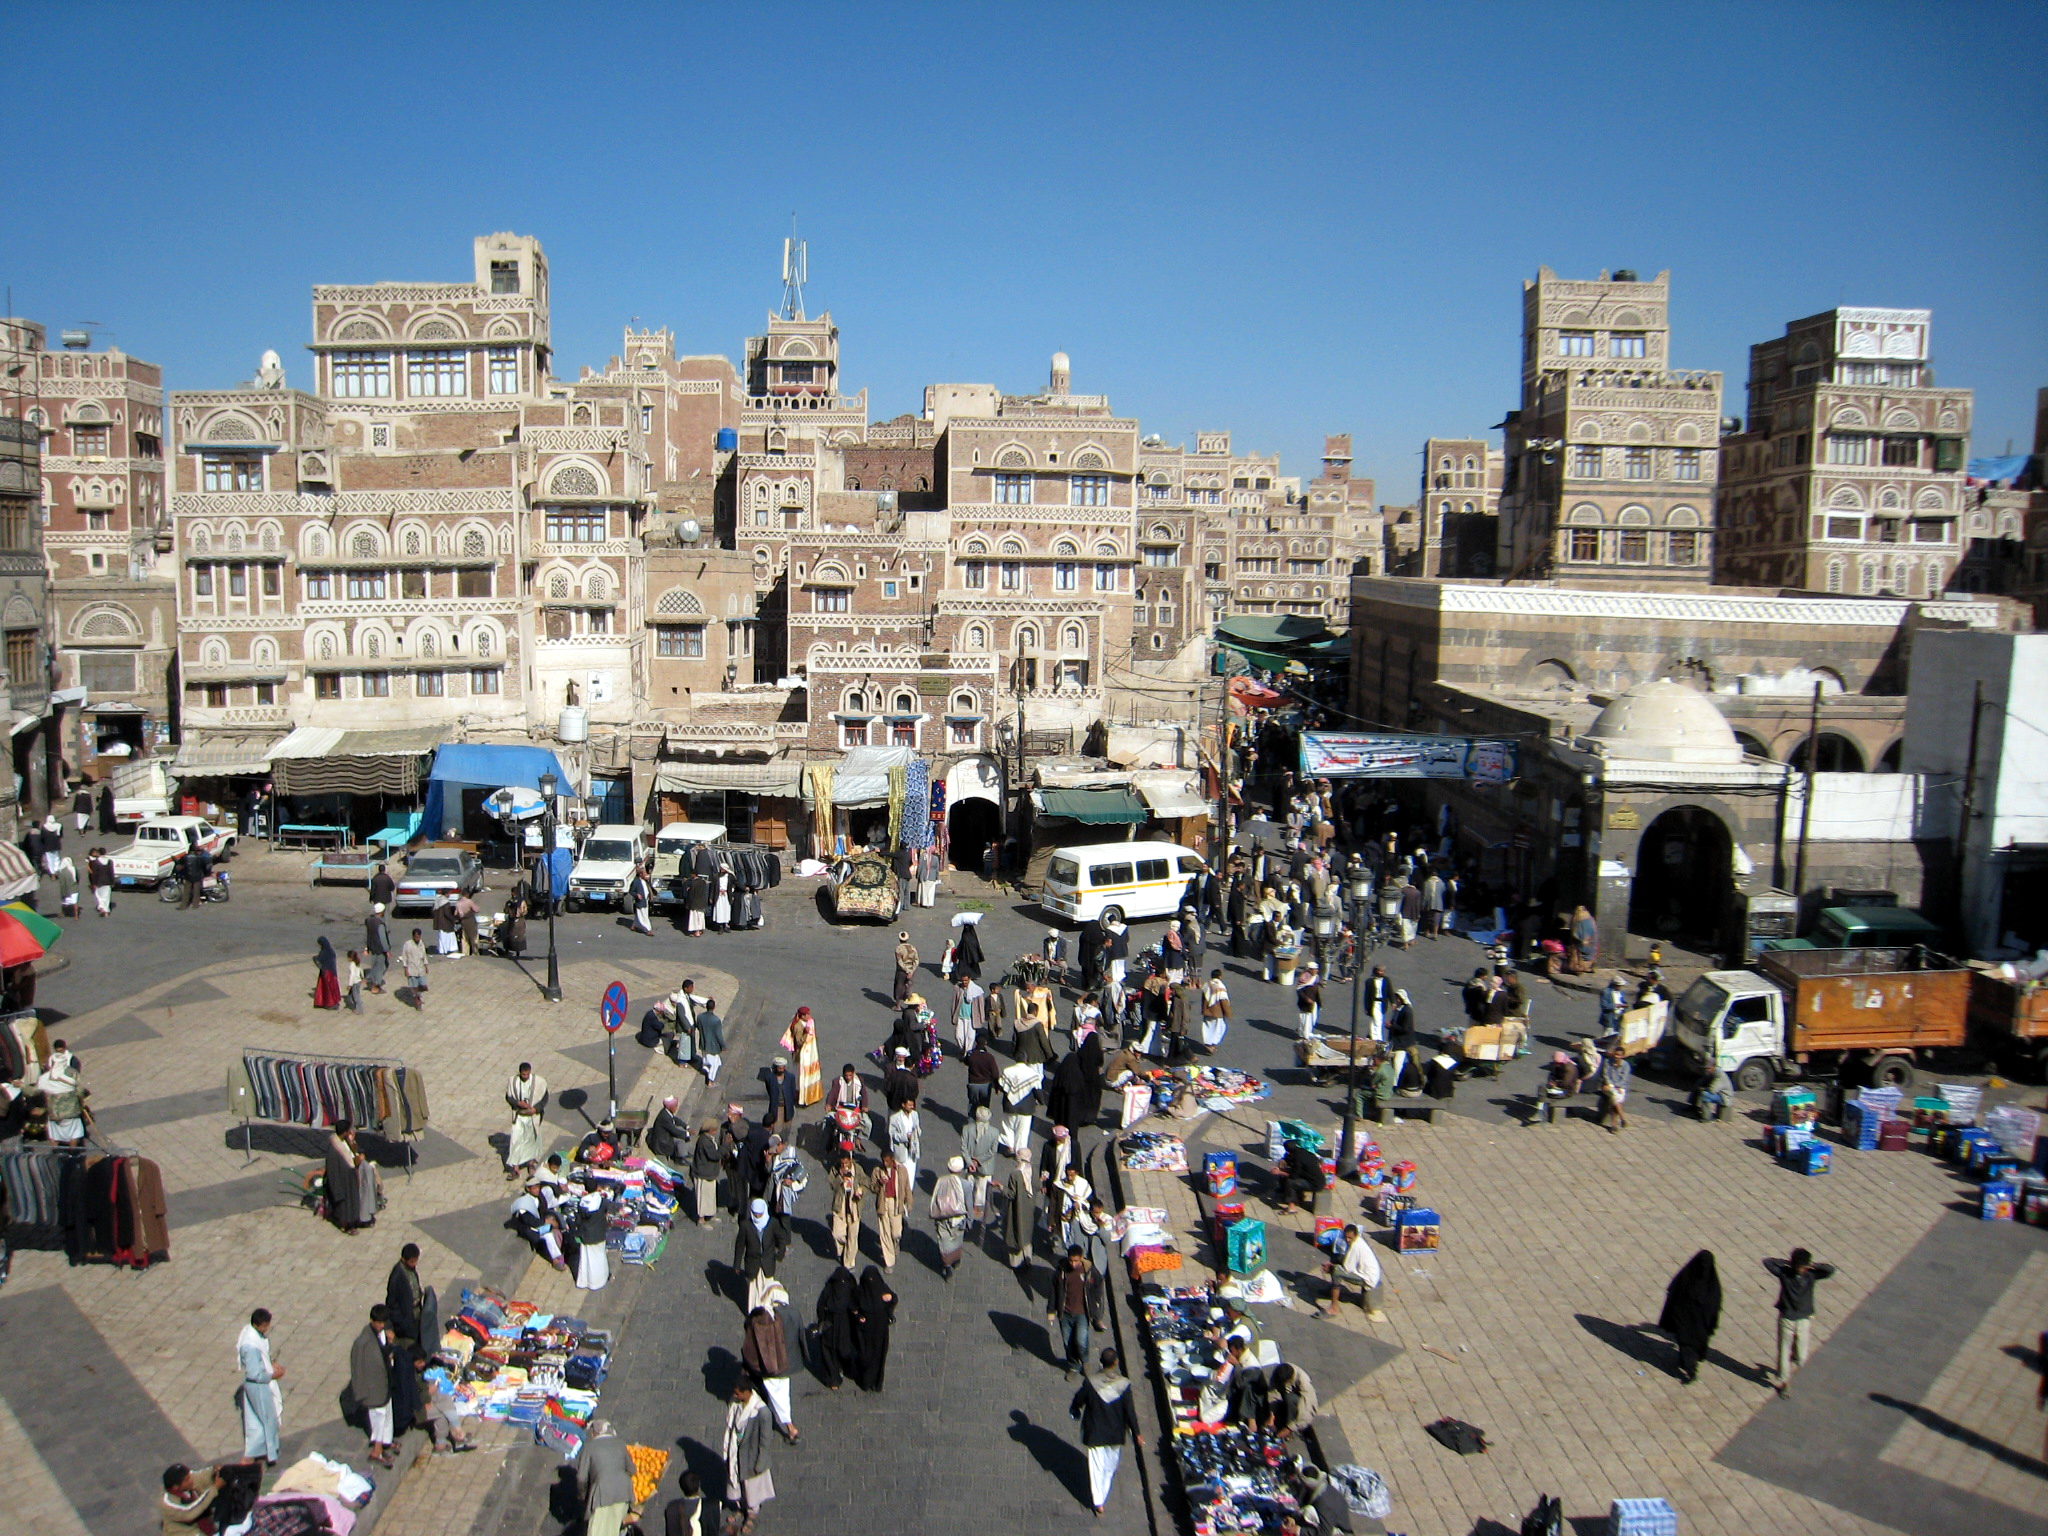 View of the historic centre of Sanaa (photo: Guy Helminger)